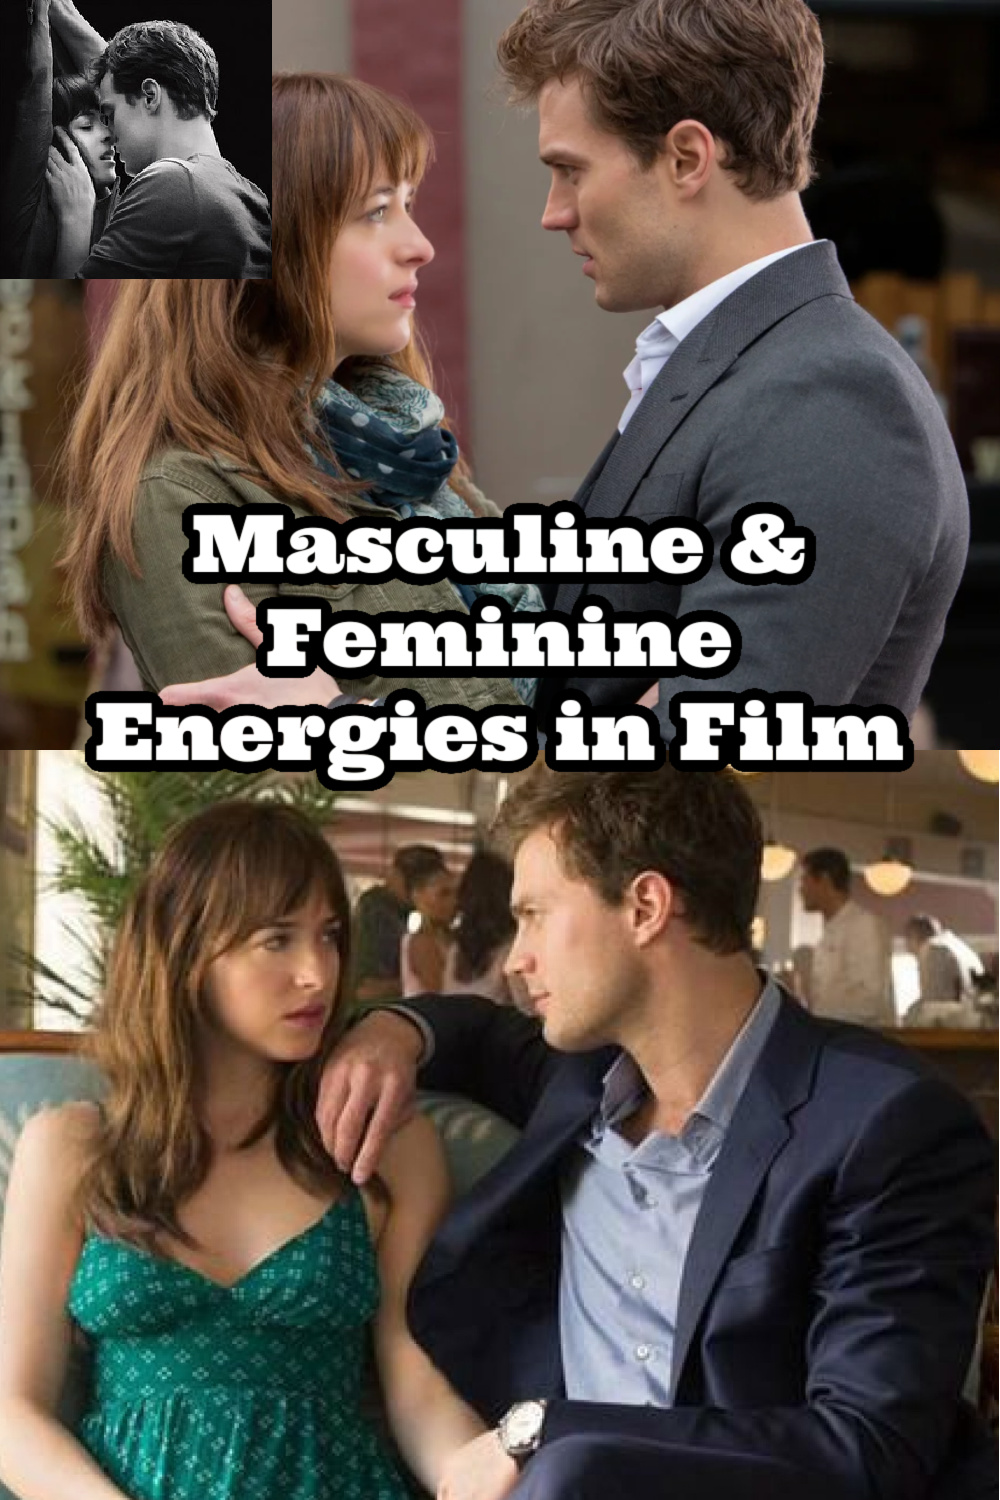 Feminine Sexual Fantasies | Sexual Polarity in Relationships | 50 Shades of Grey Analysis